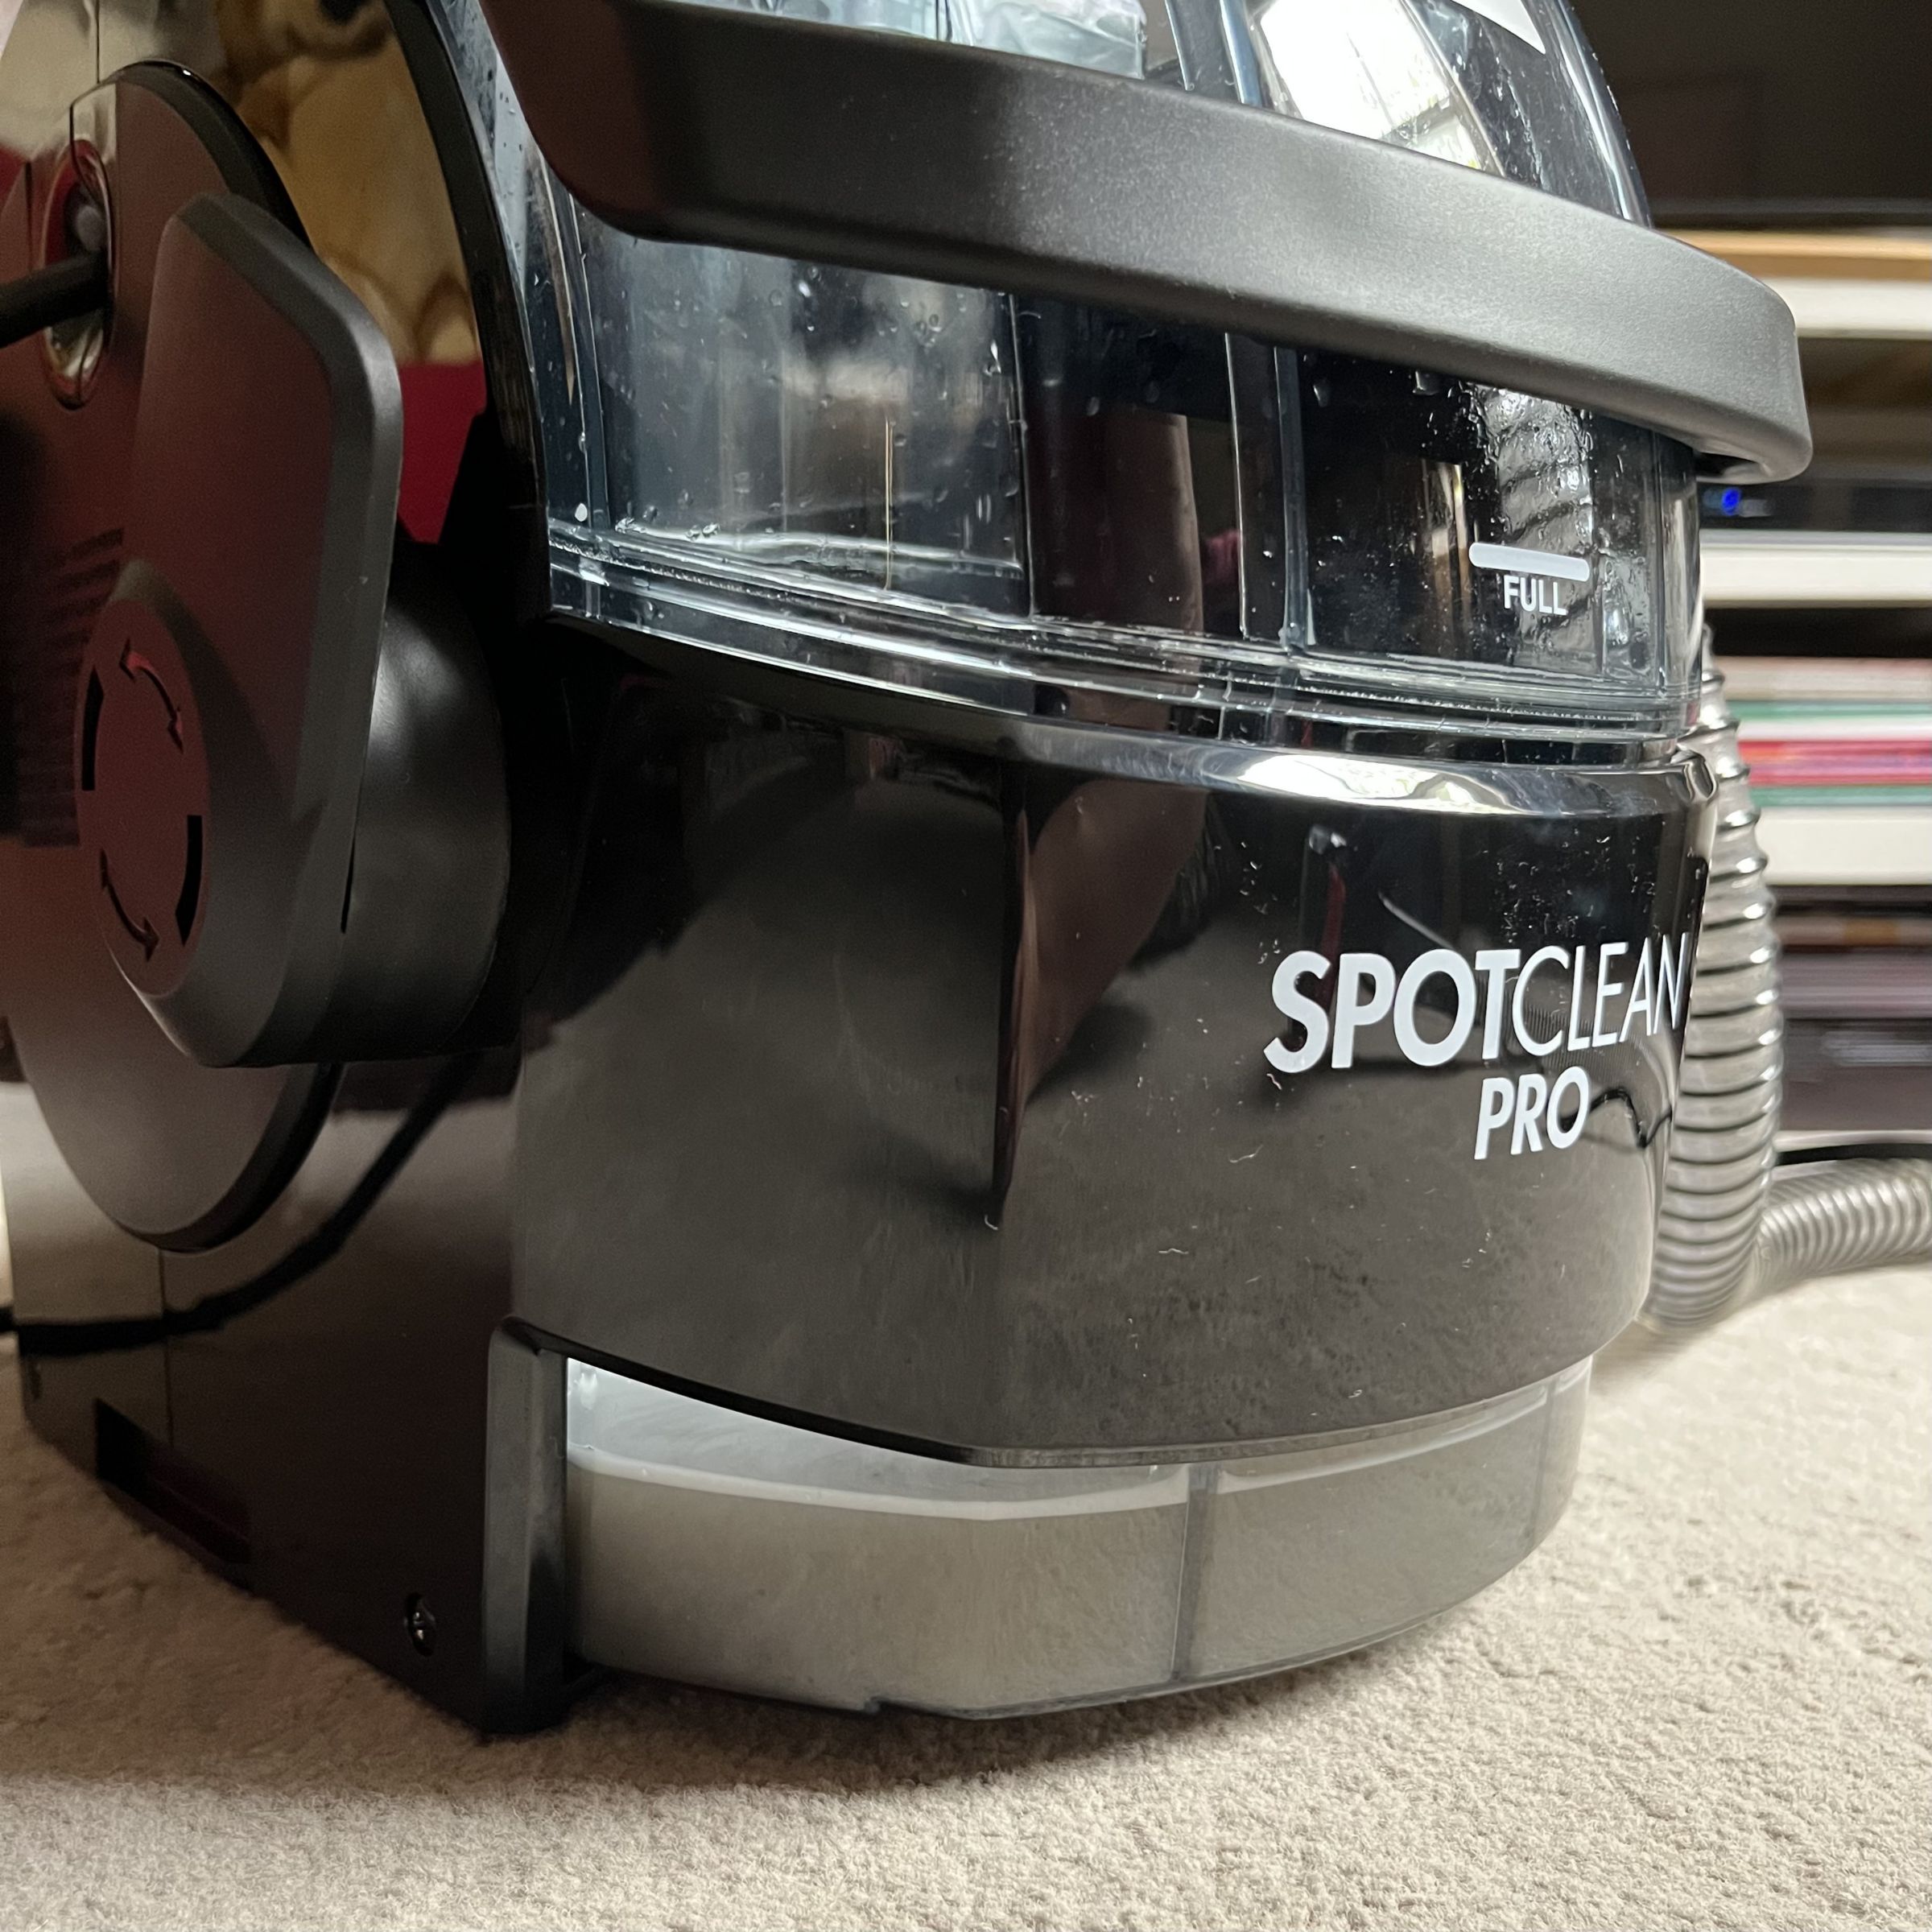 BISSELL SpotClean Pro Spot Cleaner £179.99